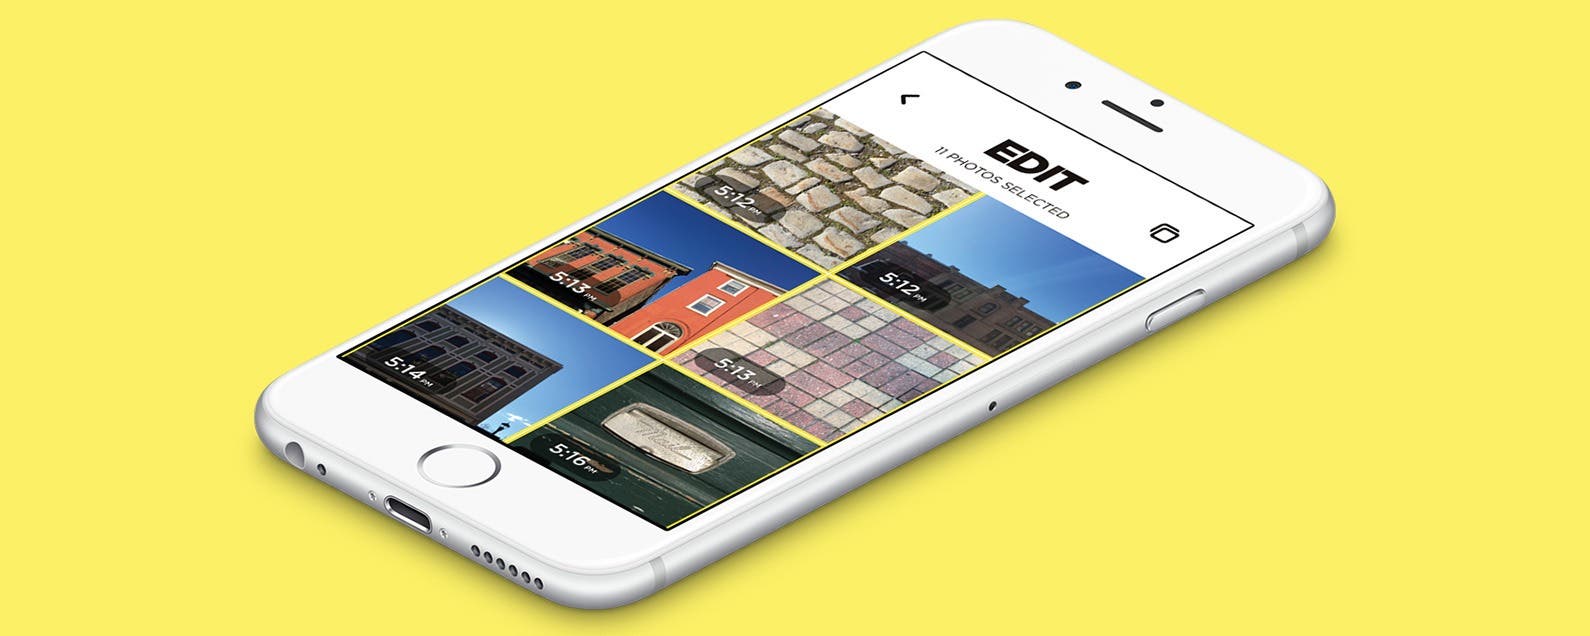 Top 3 GIF Apps for iPhone